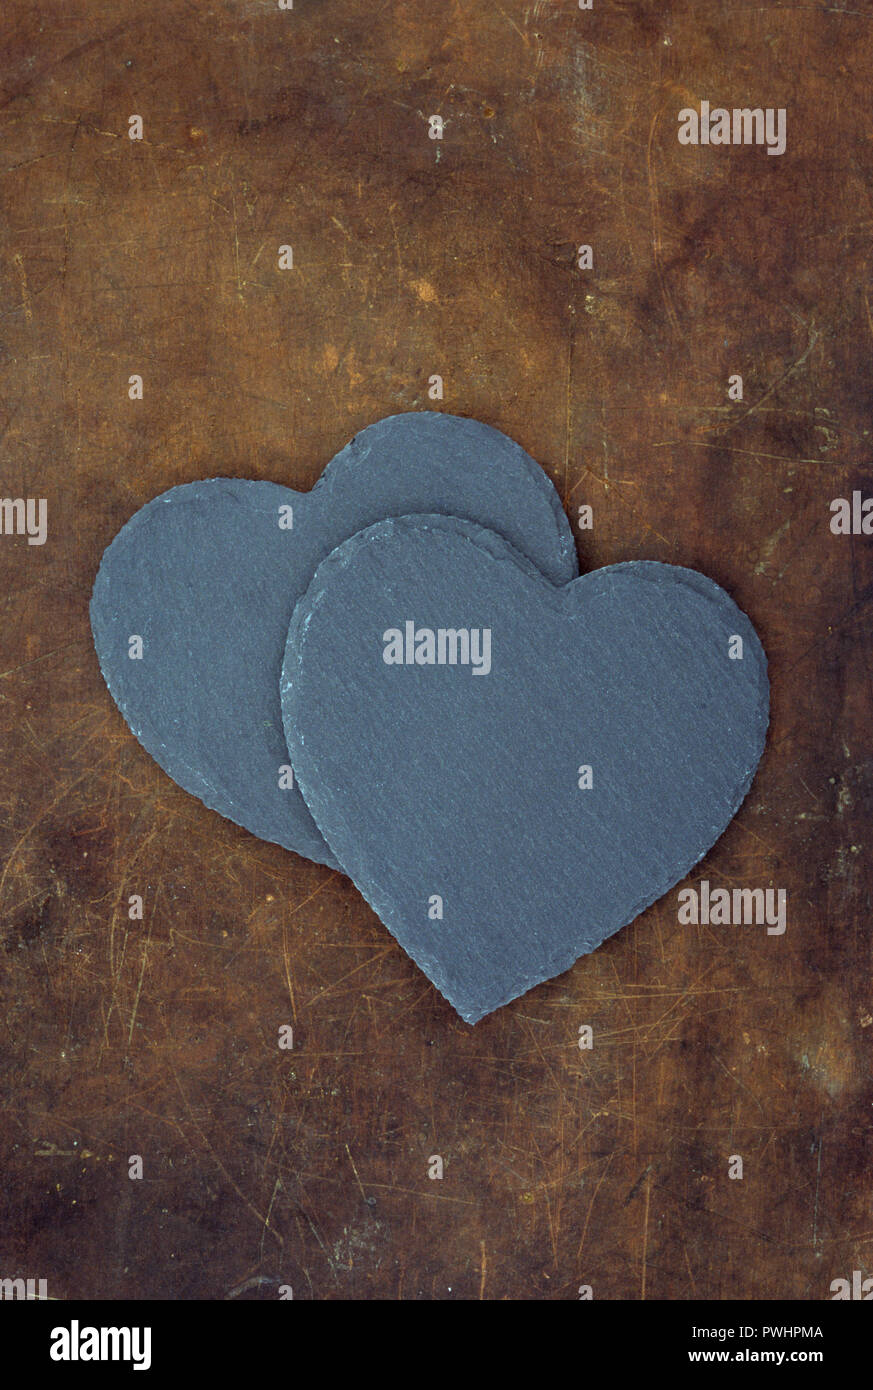 Two heart shaped pieces of grey slate lying on worn brown leather Stock Photo